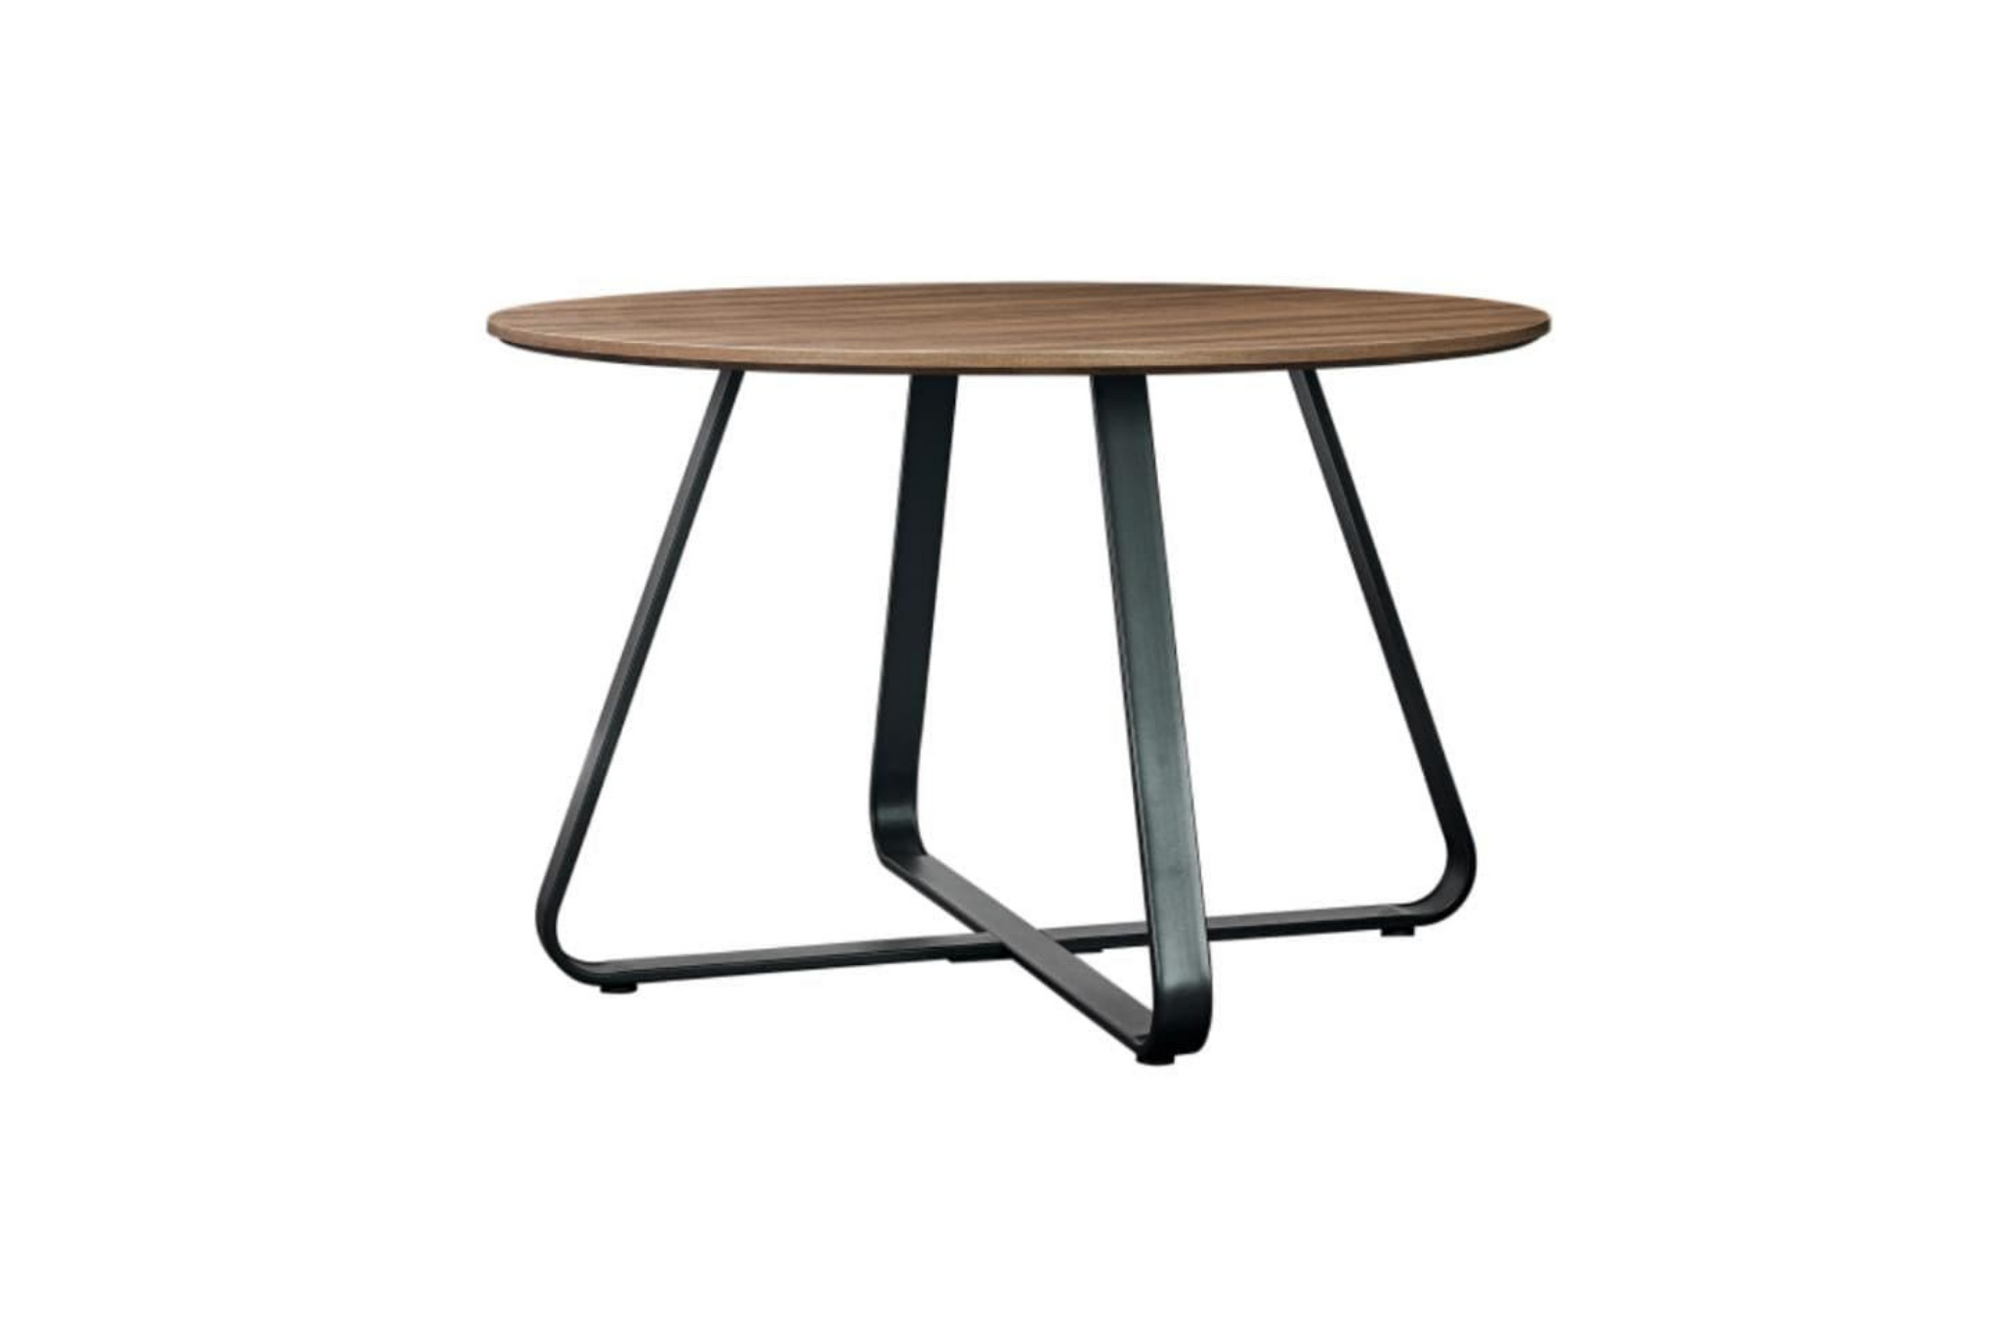 Large Round Dining Table with wooden surface - Collection Only - Fervor + Hue